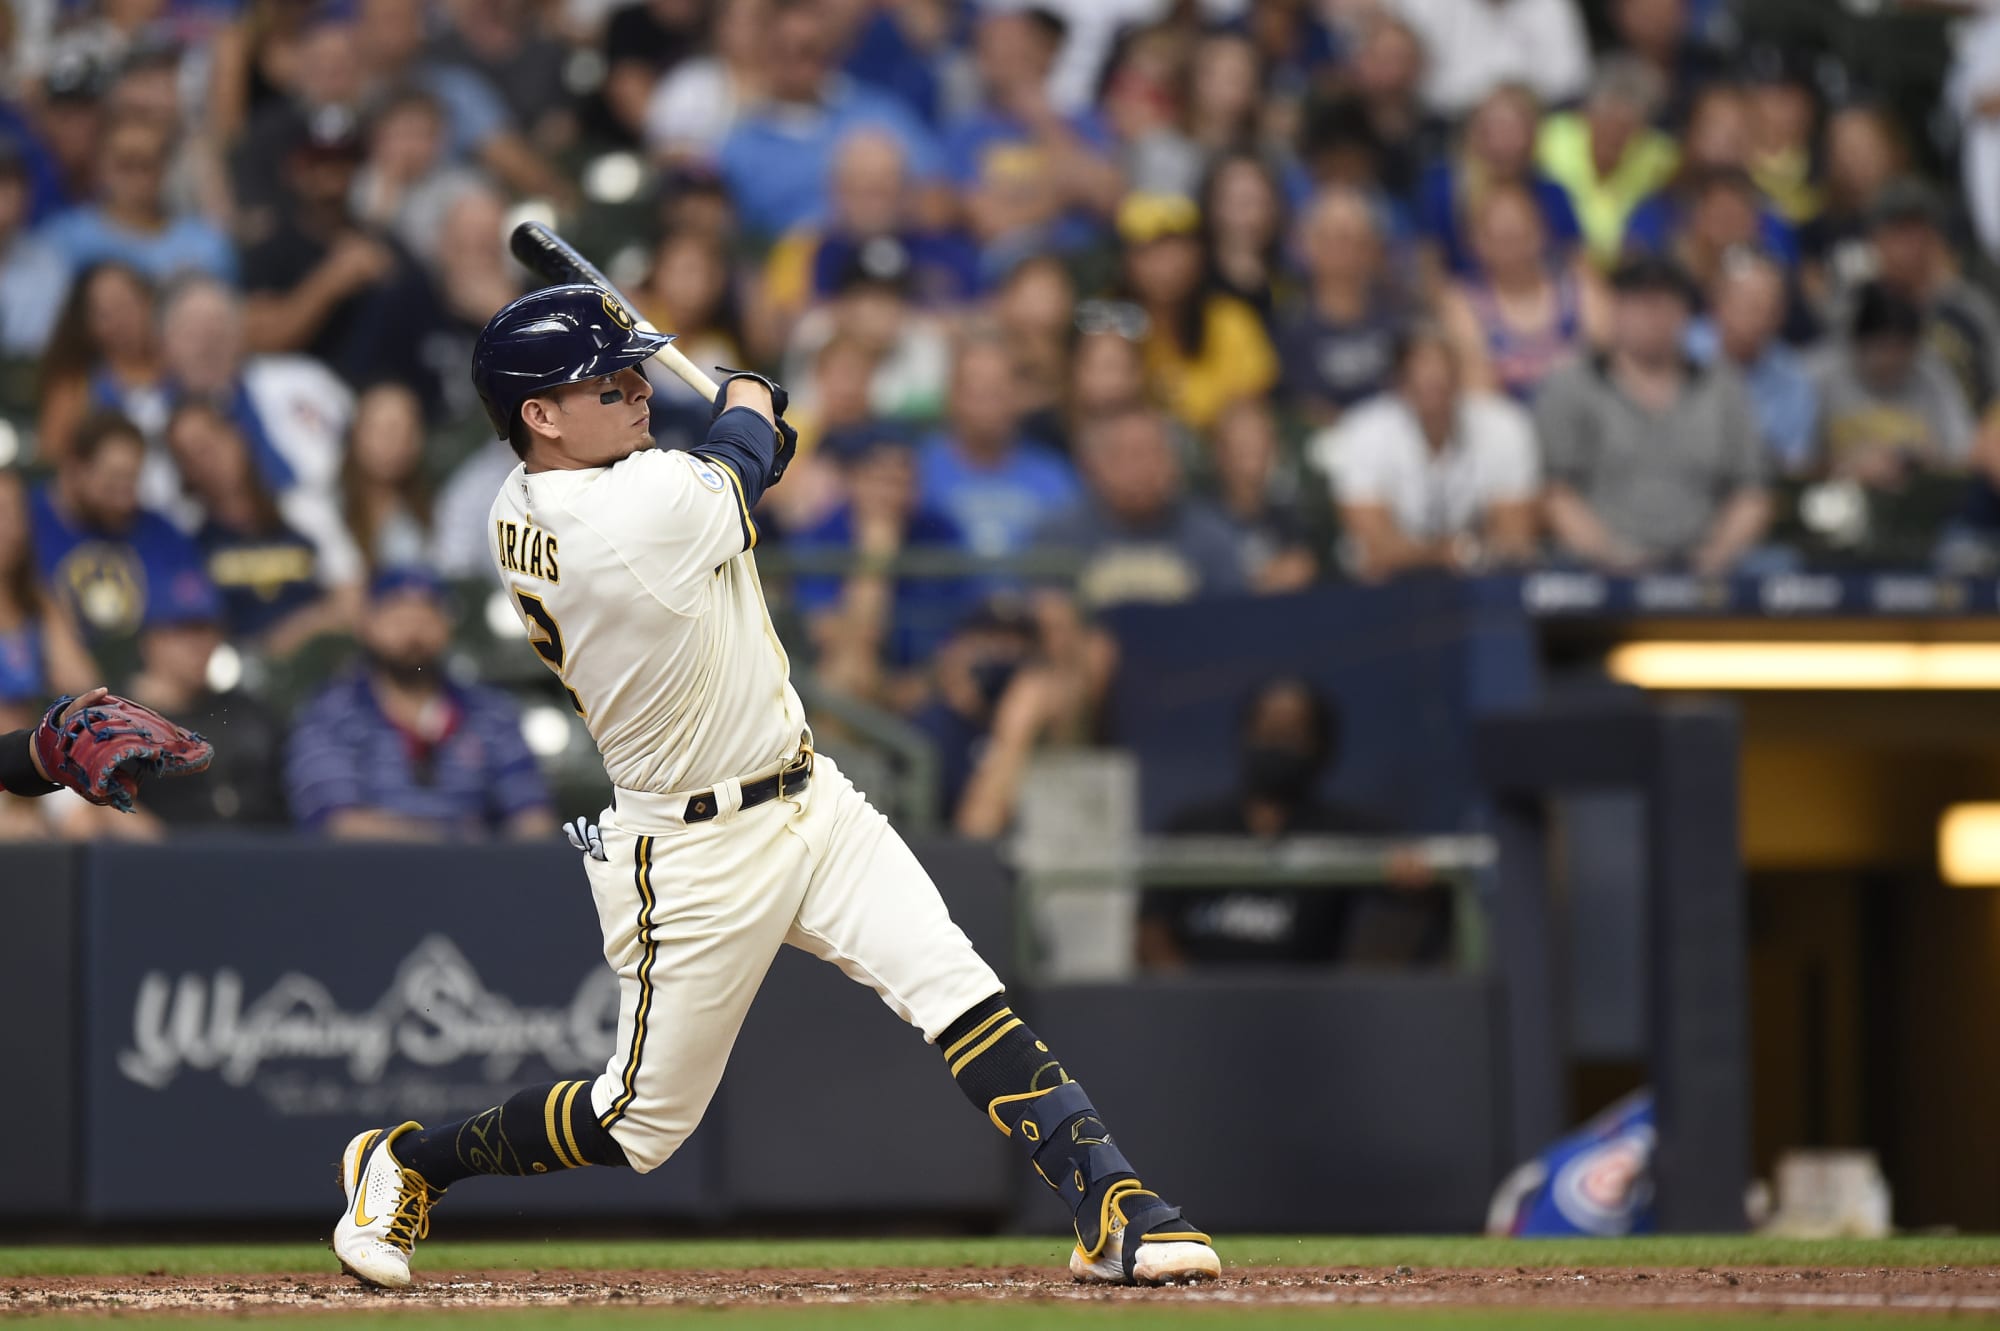 Luis Urias of the Milwaukee Brewers bats against the Chicago Cubs